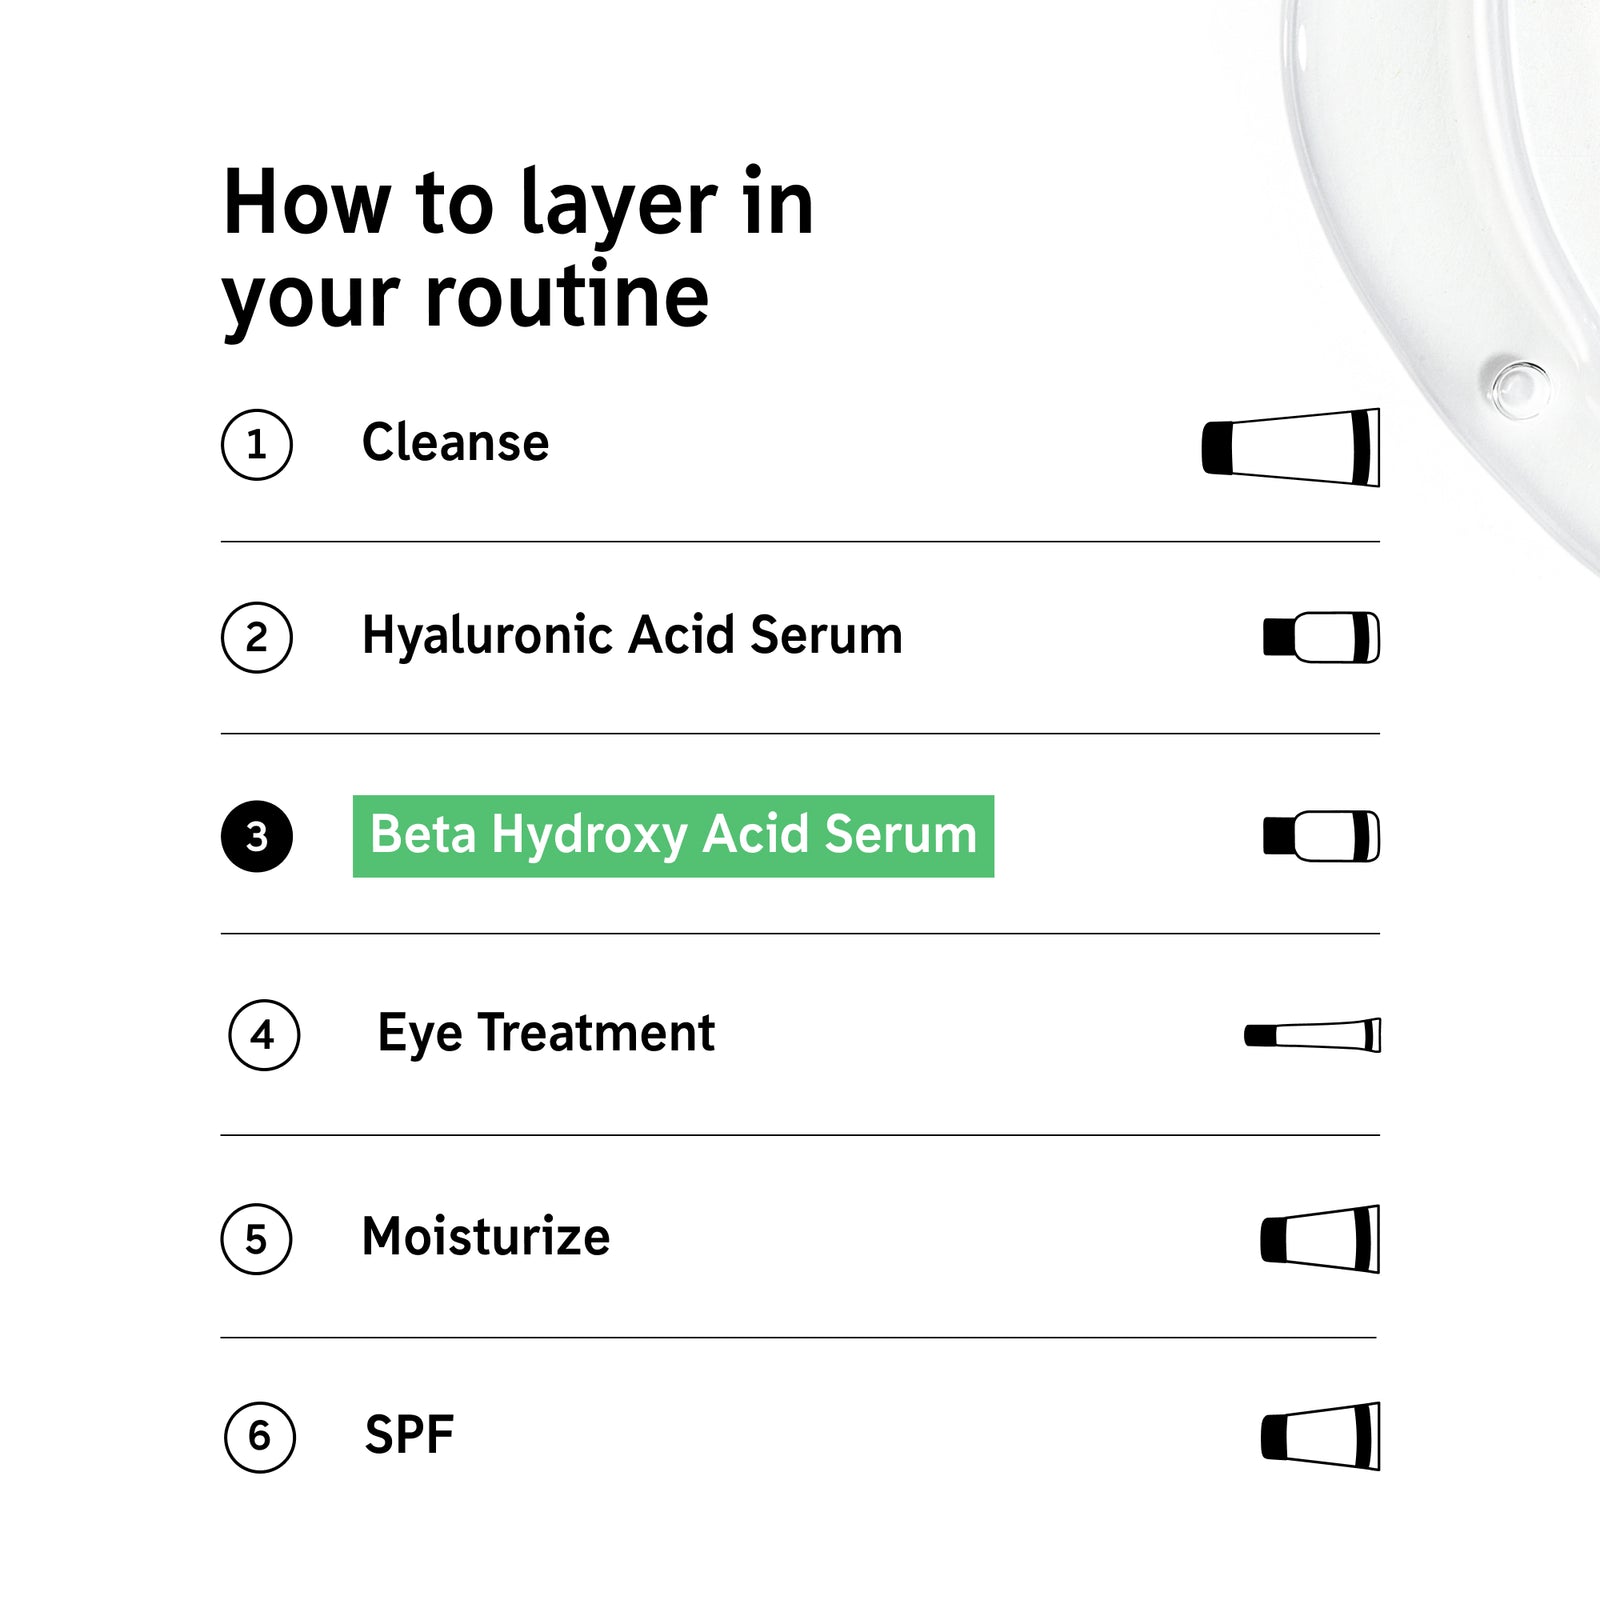 How to layer Beta Hydroxy Acid serum in your routine